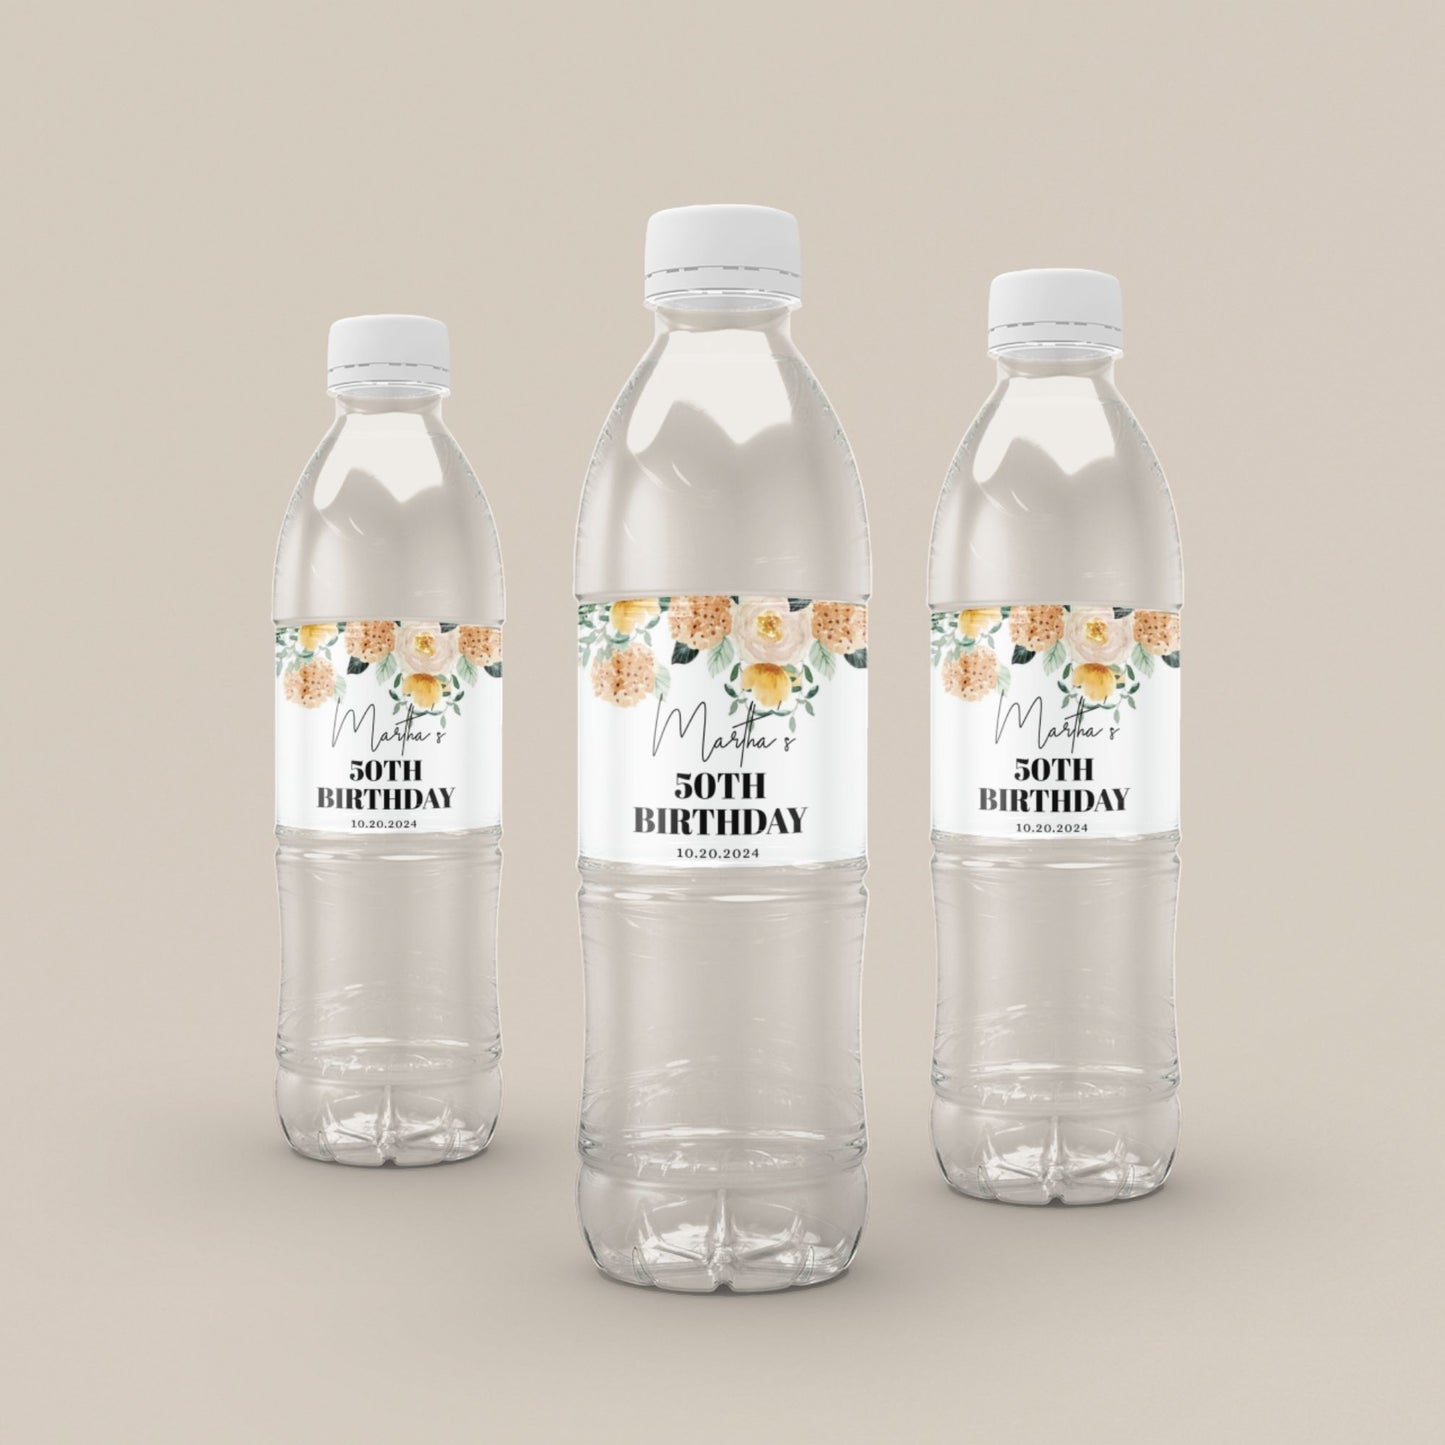 50TH Birthday Water Bottle Label Template